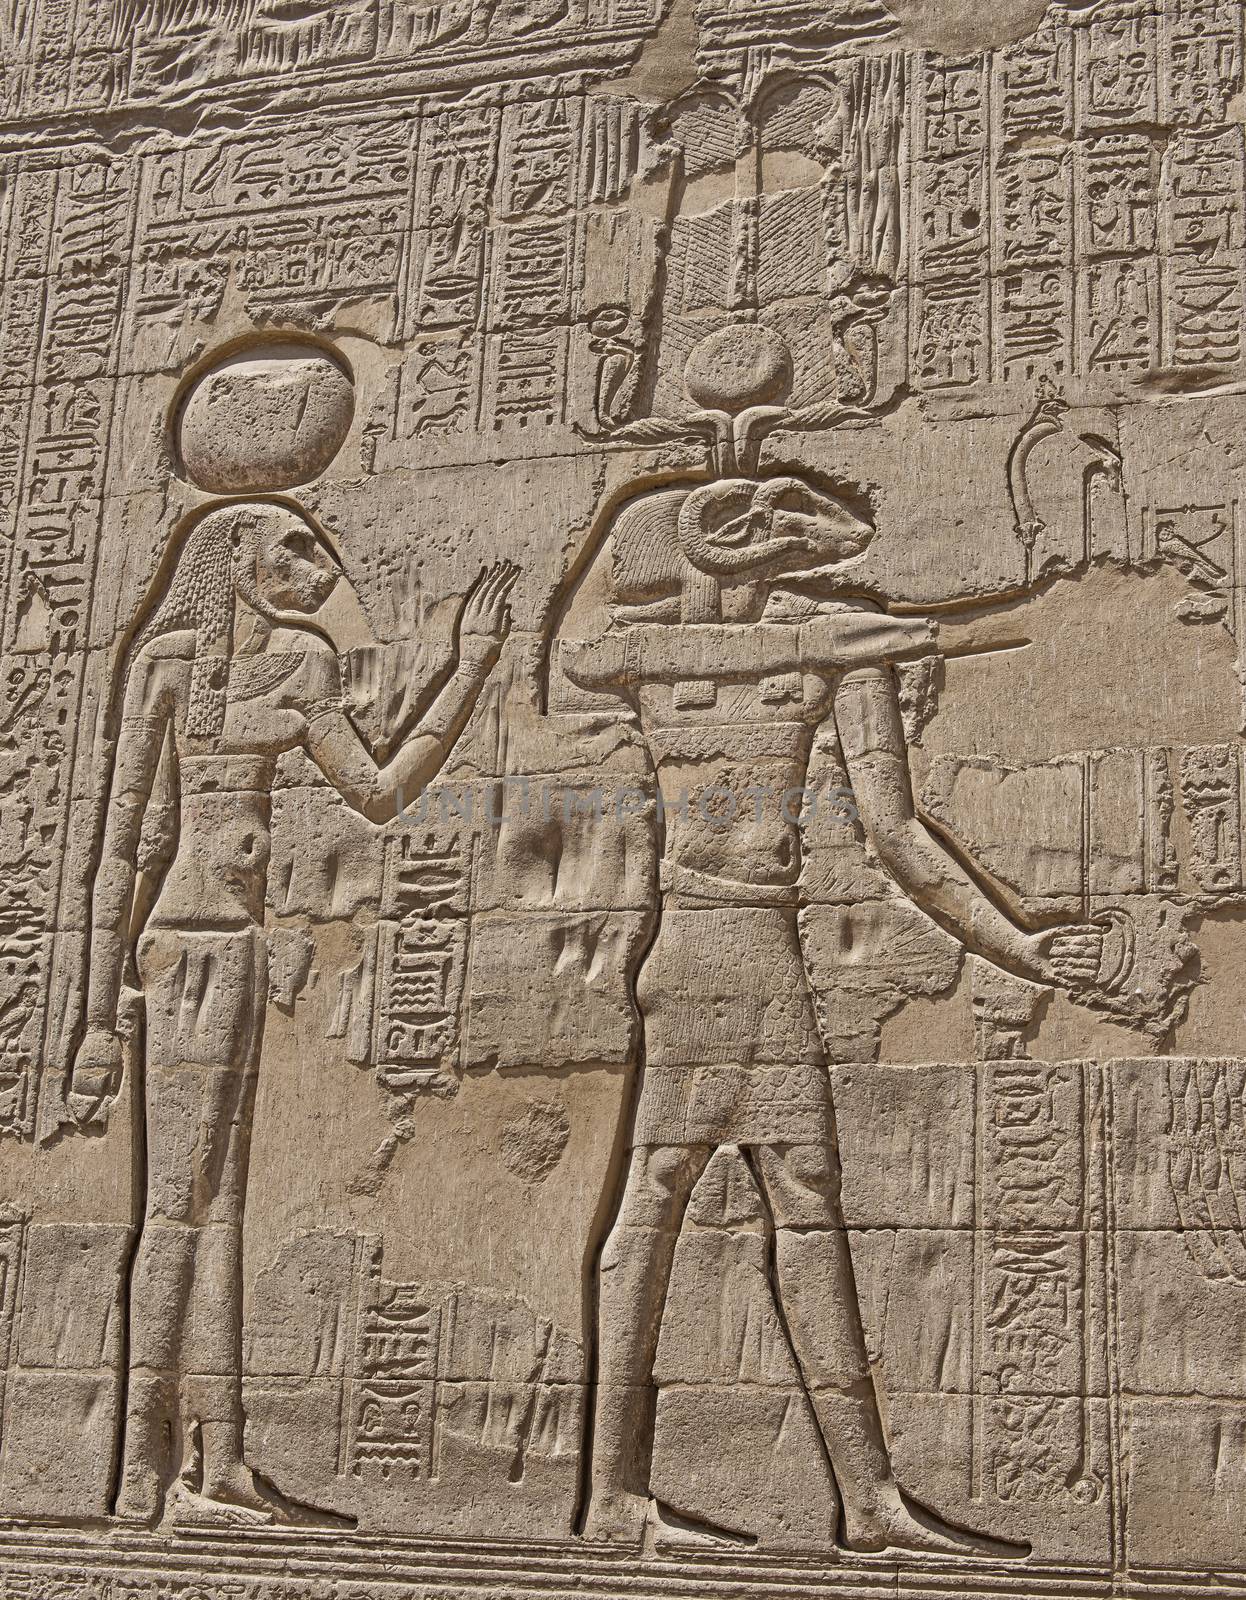 Hieroglypic carvings on wall at the ancient egyptian temple of Khnum in Esna